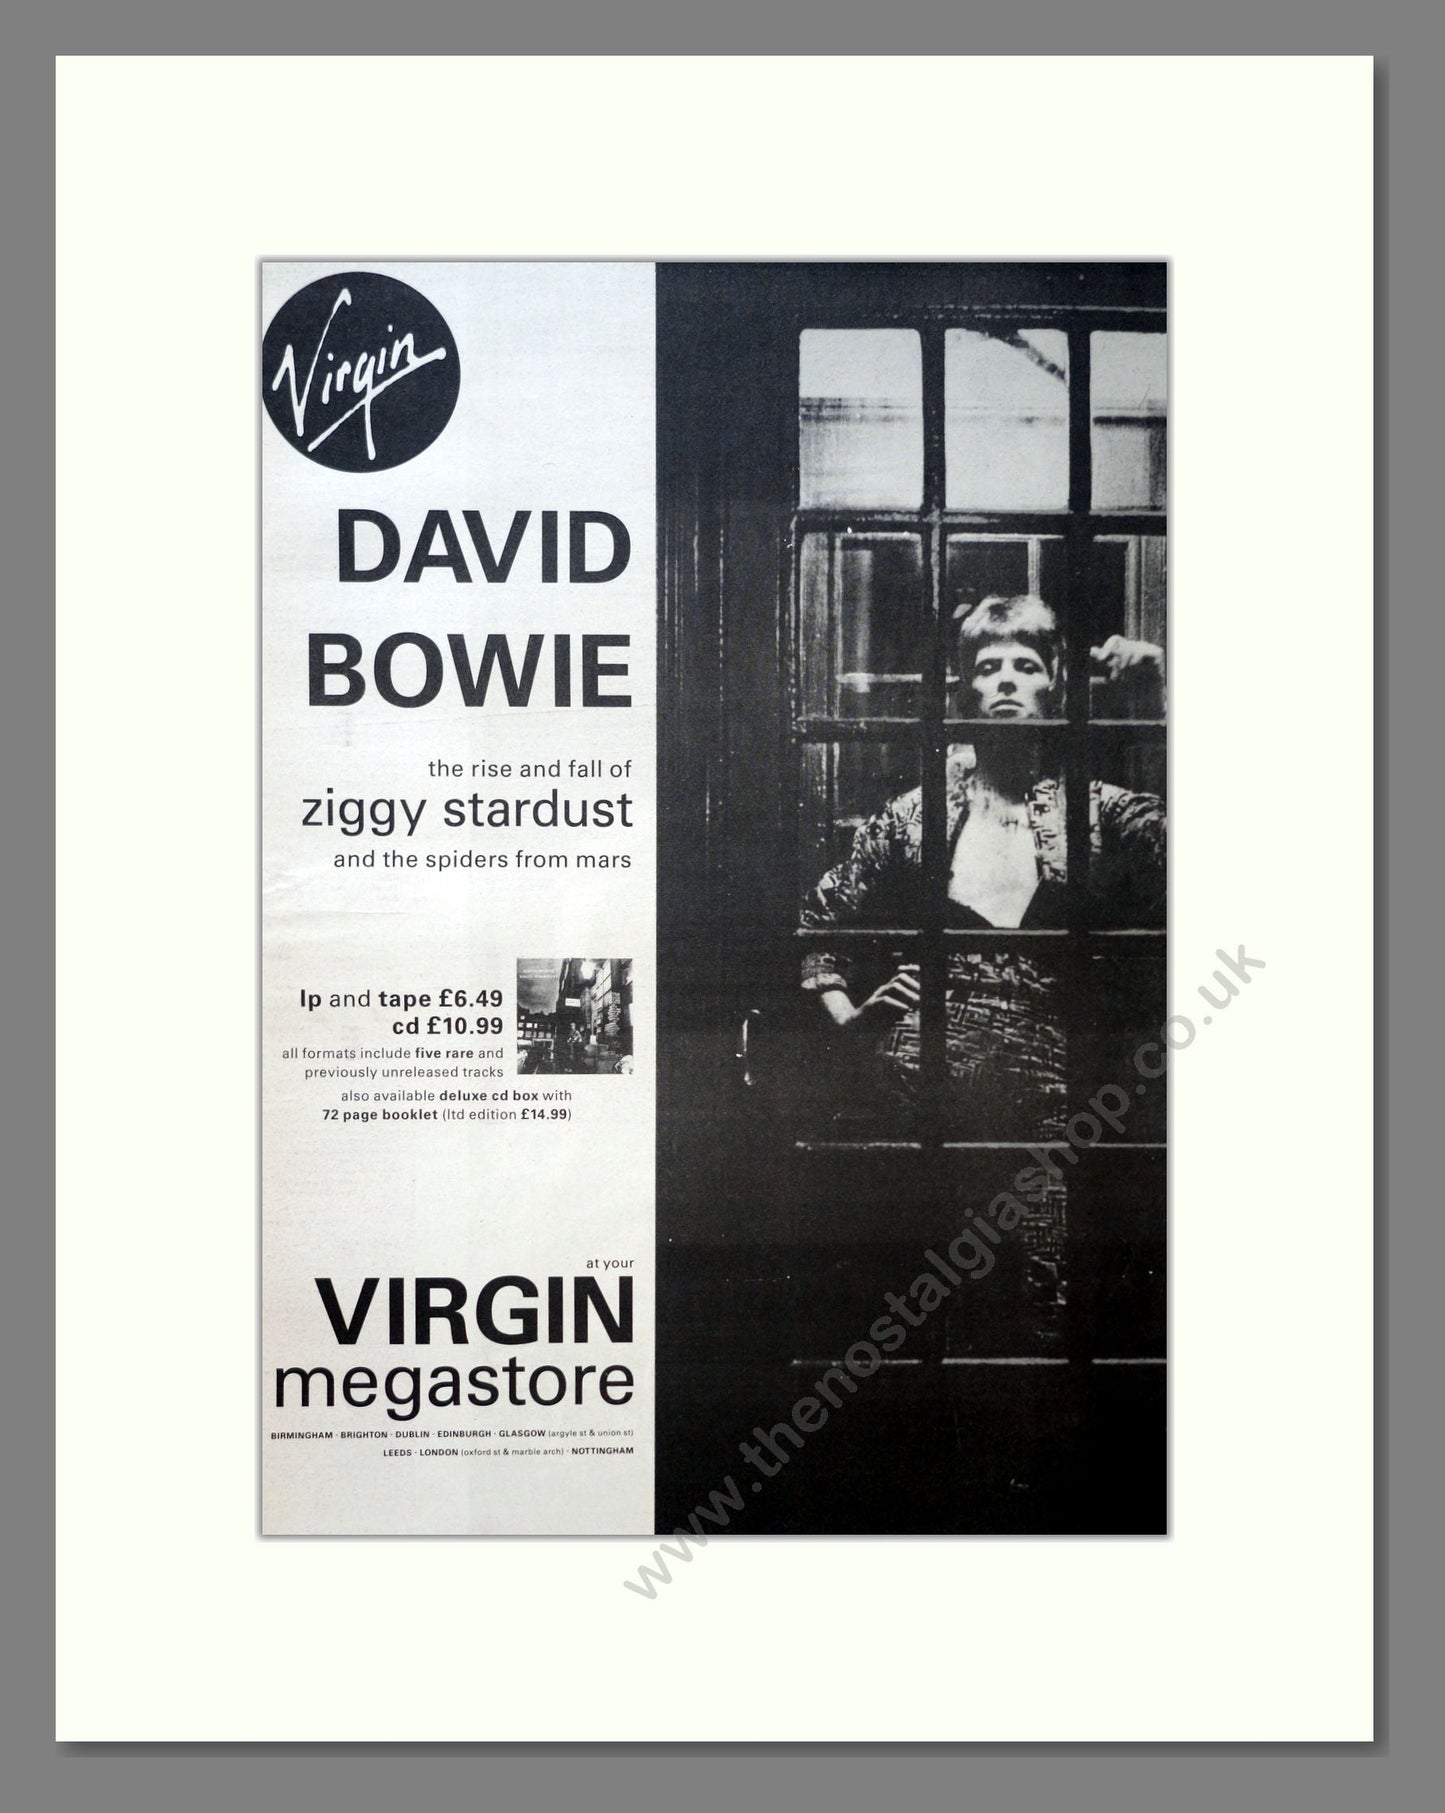 David Bowie - Rise And Fall Of Ziggy Stardust. Vintage Advert 1990 (ref AD18298)